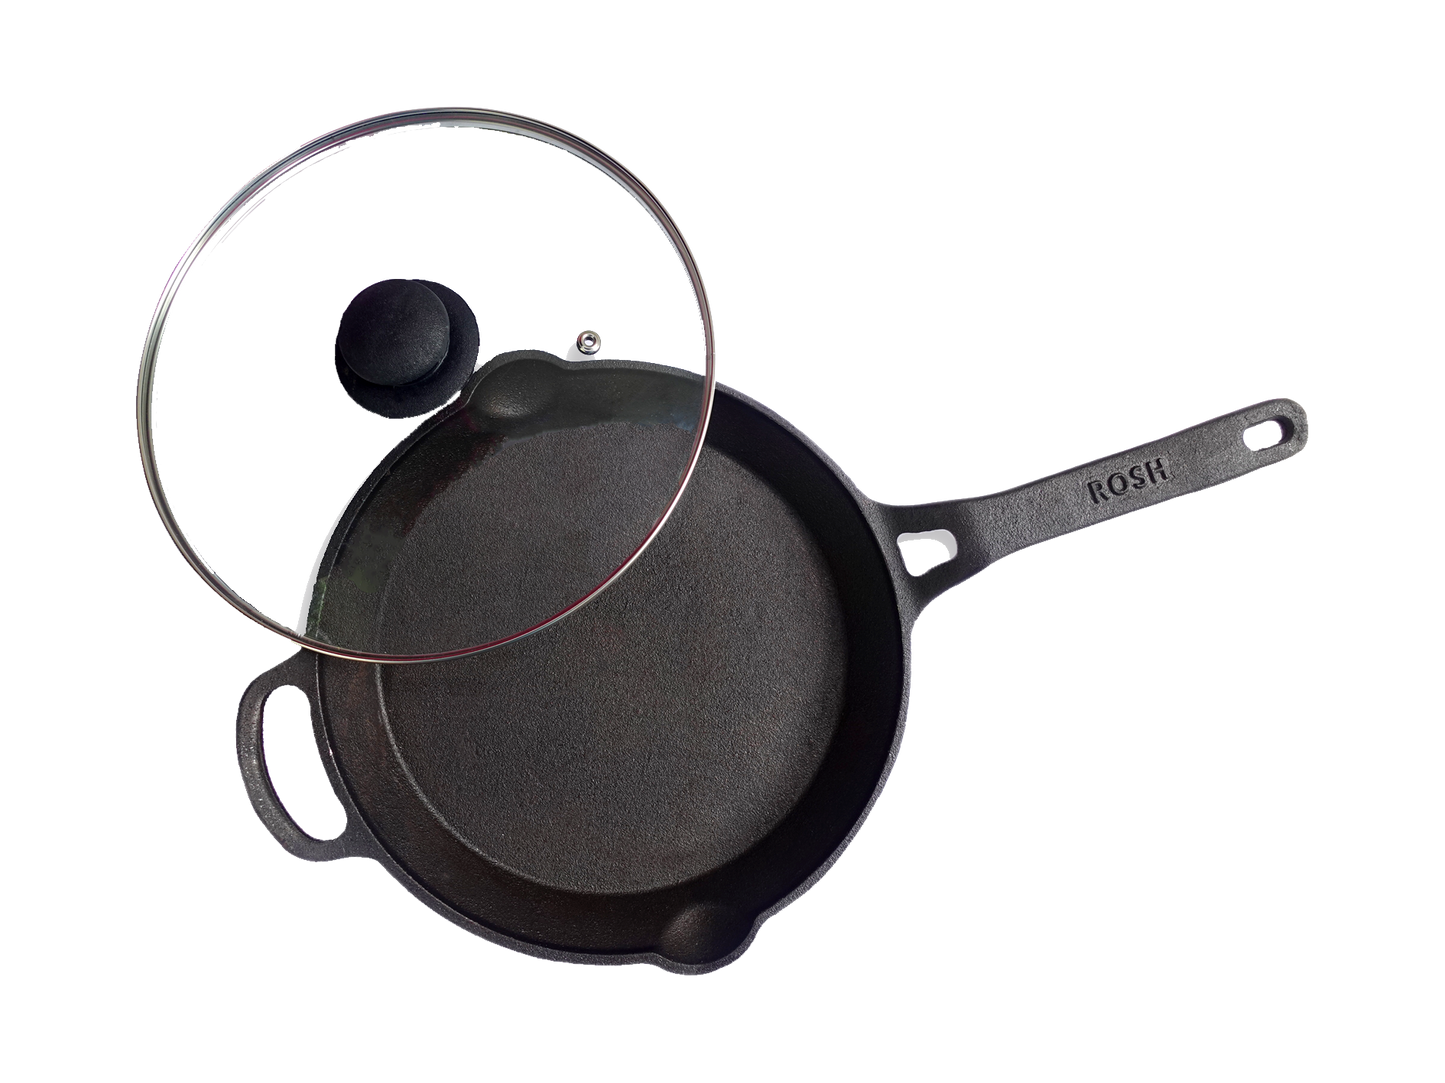 Combo Offer -9 - Skillet - With Lid - Elevated Handle - Rosh - Modern Style. &  Dutch Pot - Rosh - With Lid